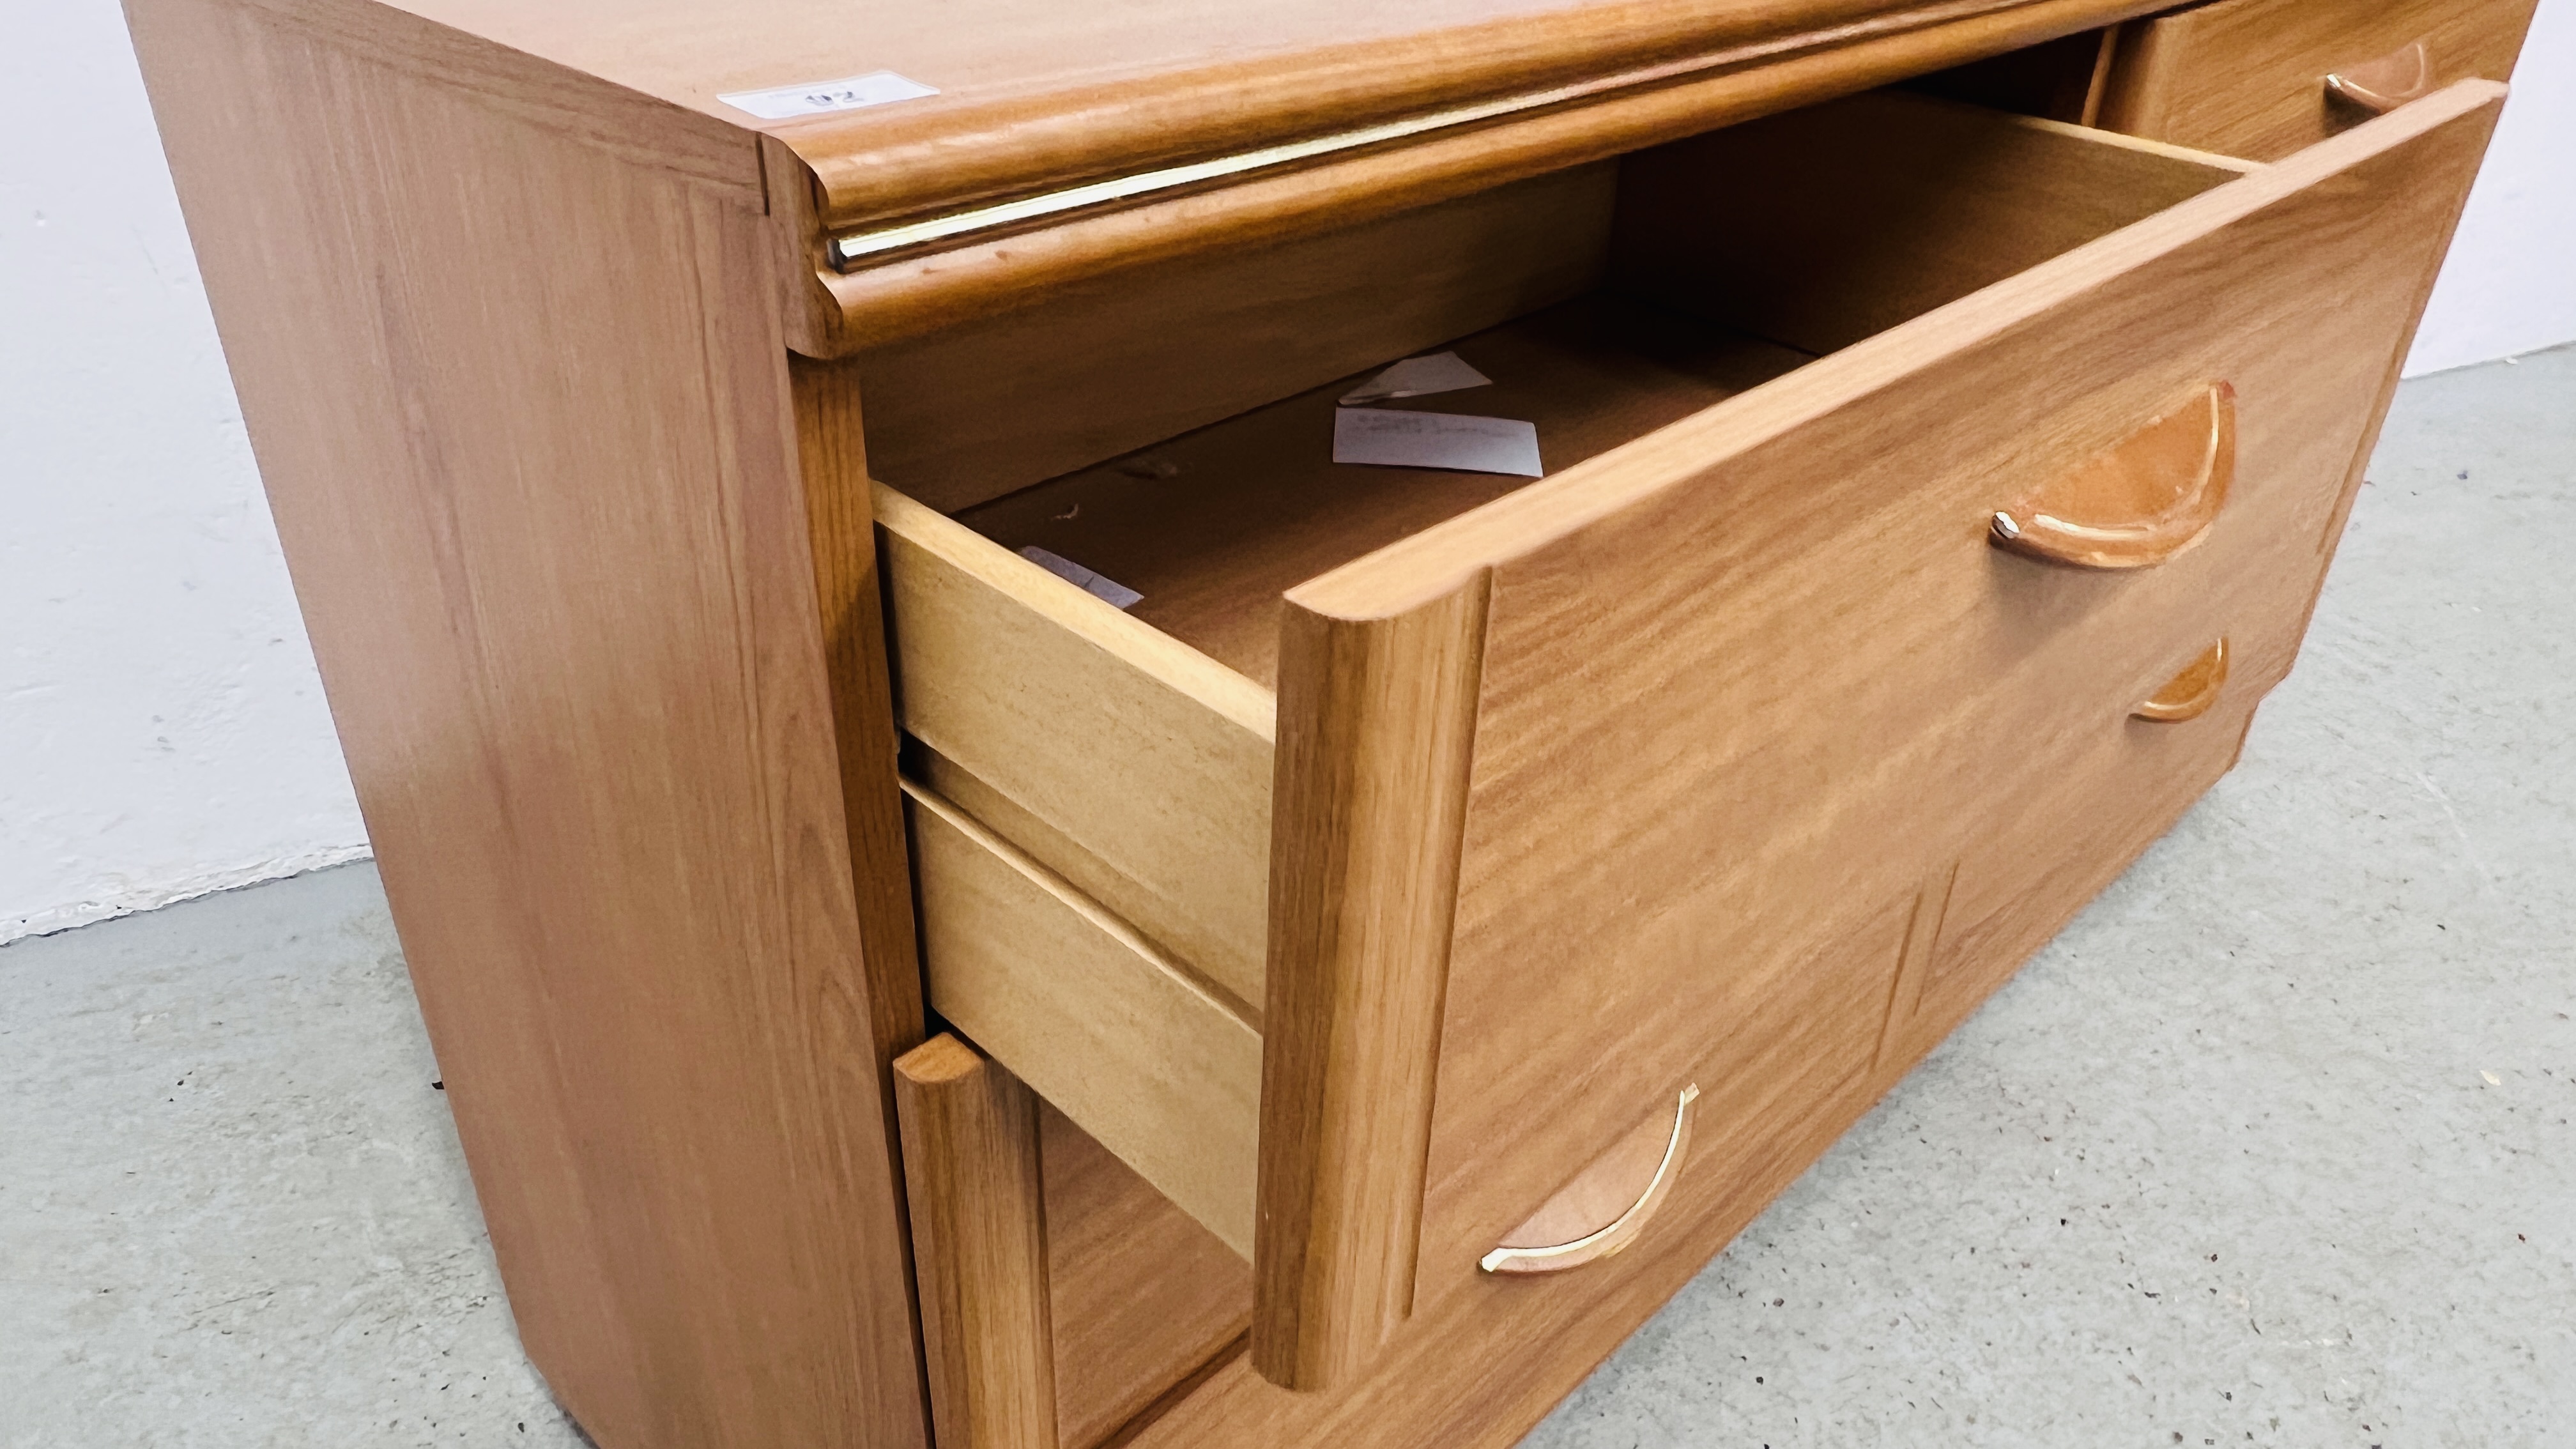 A MODERN ALSTONS CHERRY WOOD FINISH SIX DRAWER BEDROOM CHEST, W 124CM, D 41CM, H 70CM. - Image 4 of 4